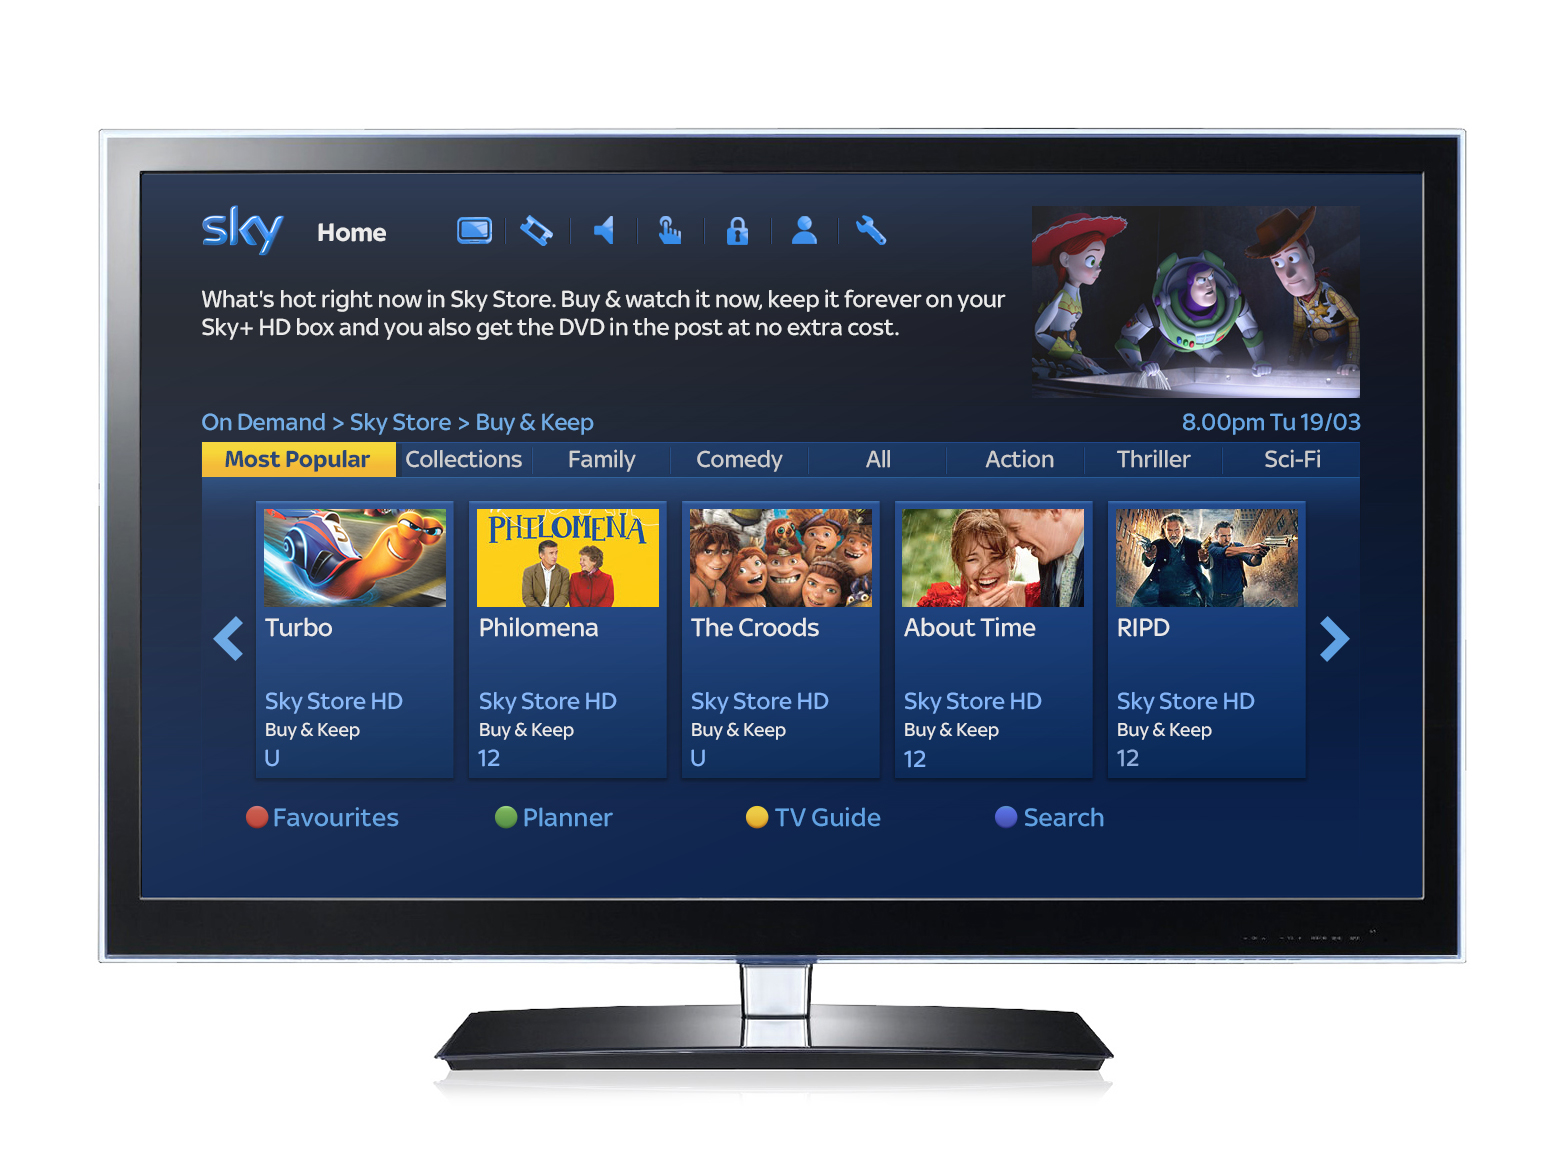 Sky Store "Buy and Keep" scheme